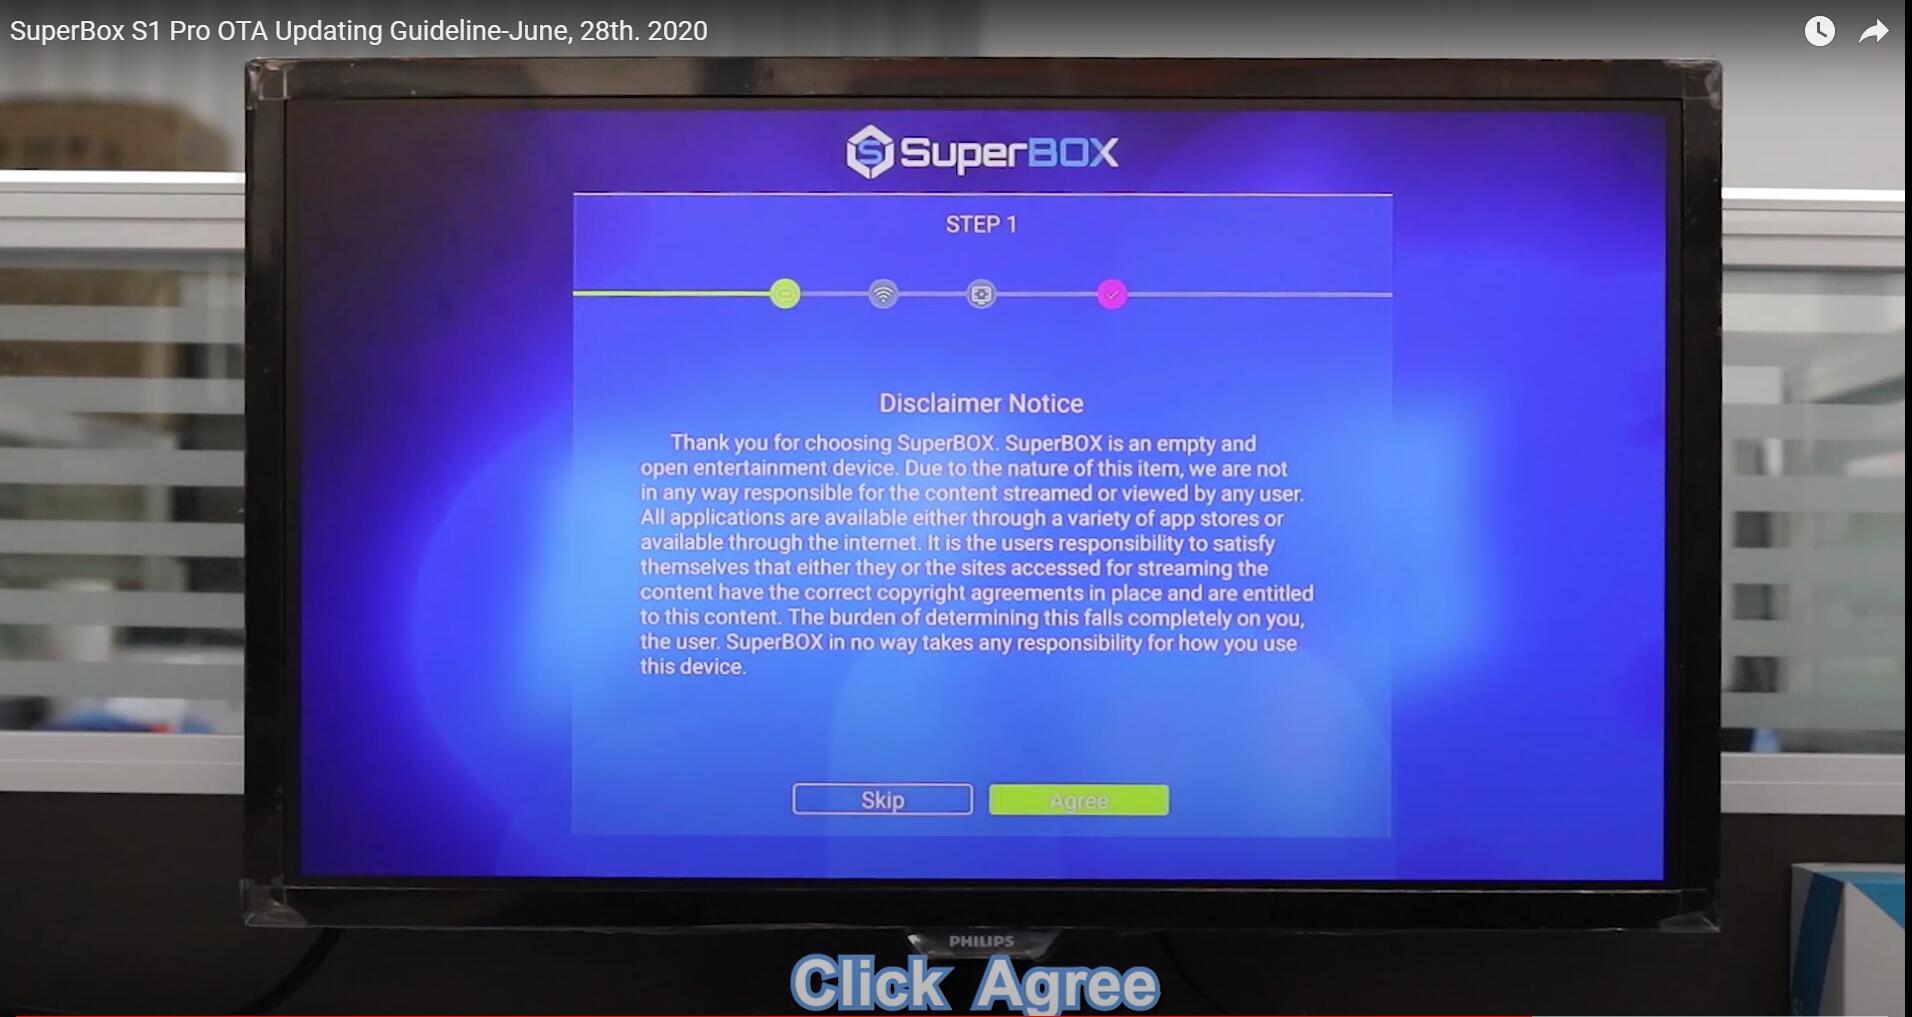 How to Update SuperBox S1 Pro?